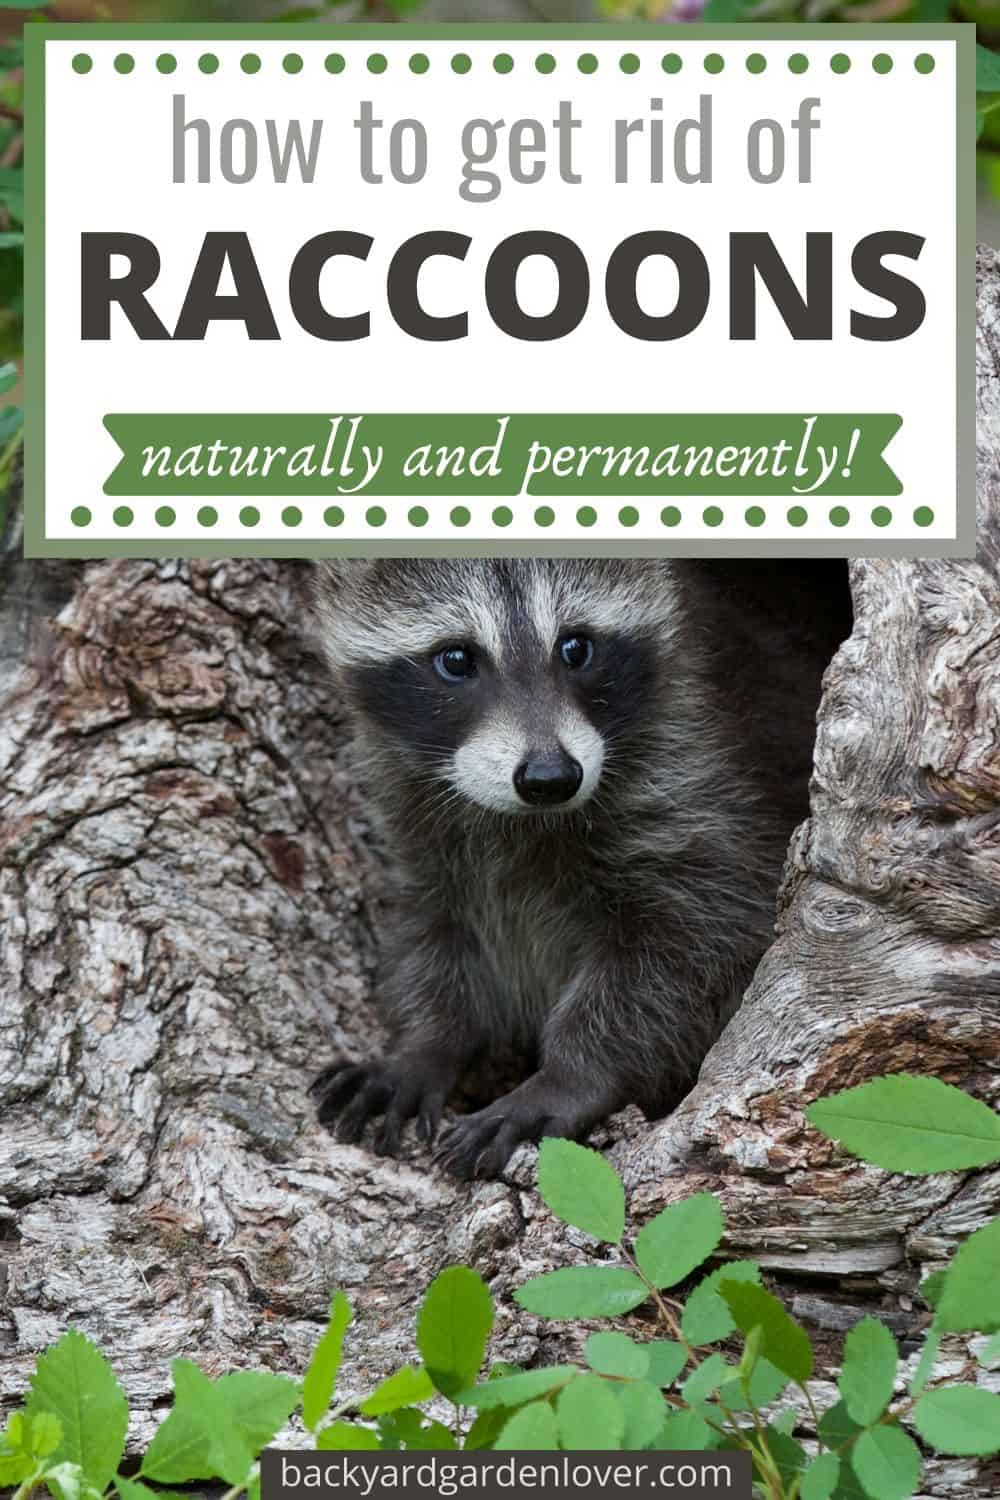 How To Get Rid Of Raccoons From Your Backyard